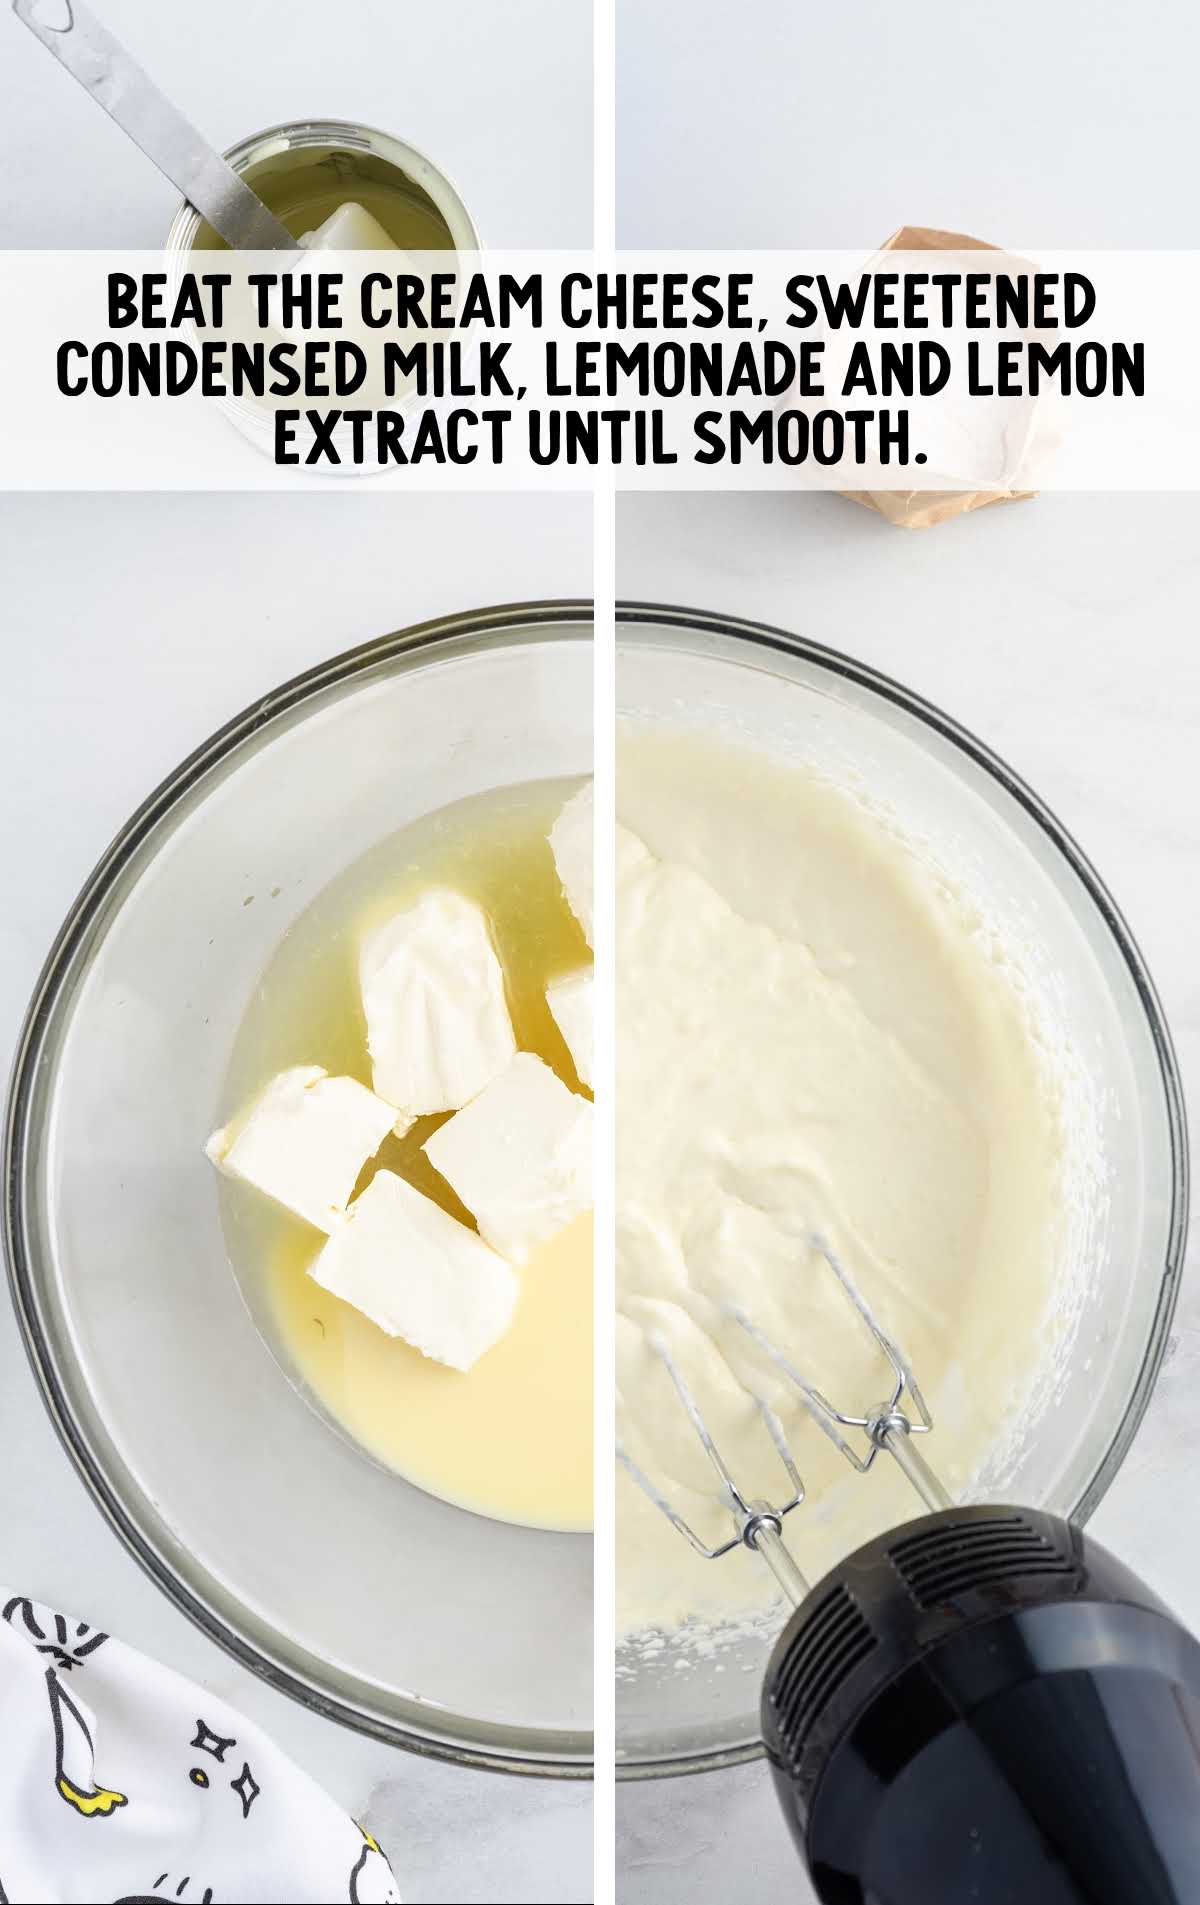 cream cheese, sweetened condense milk, lemonade and lemon extract blended in a bowl